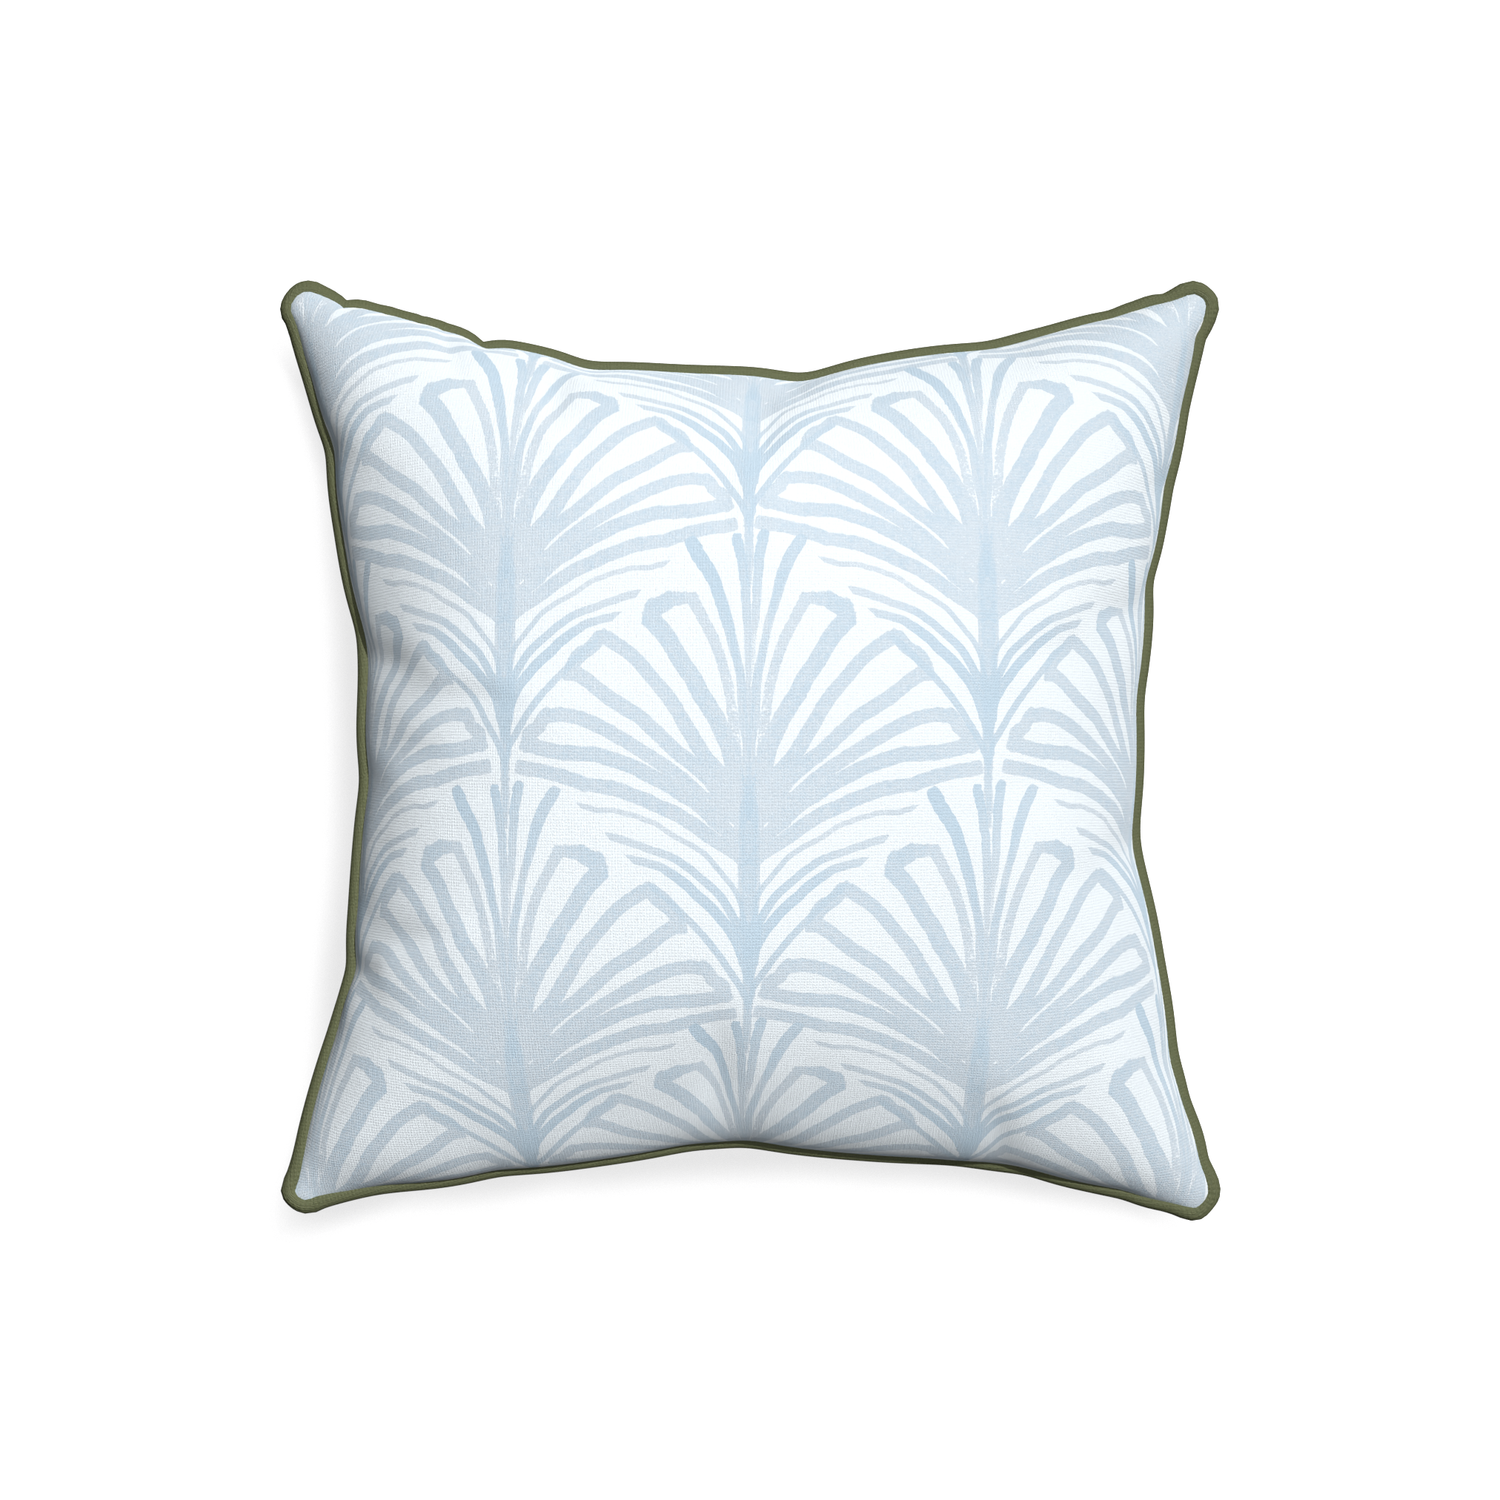 20-square suzy sky custom pillow with f piping on white background